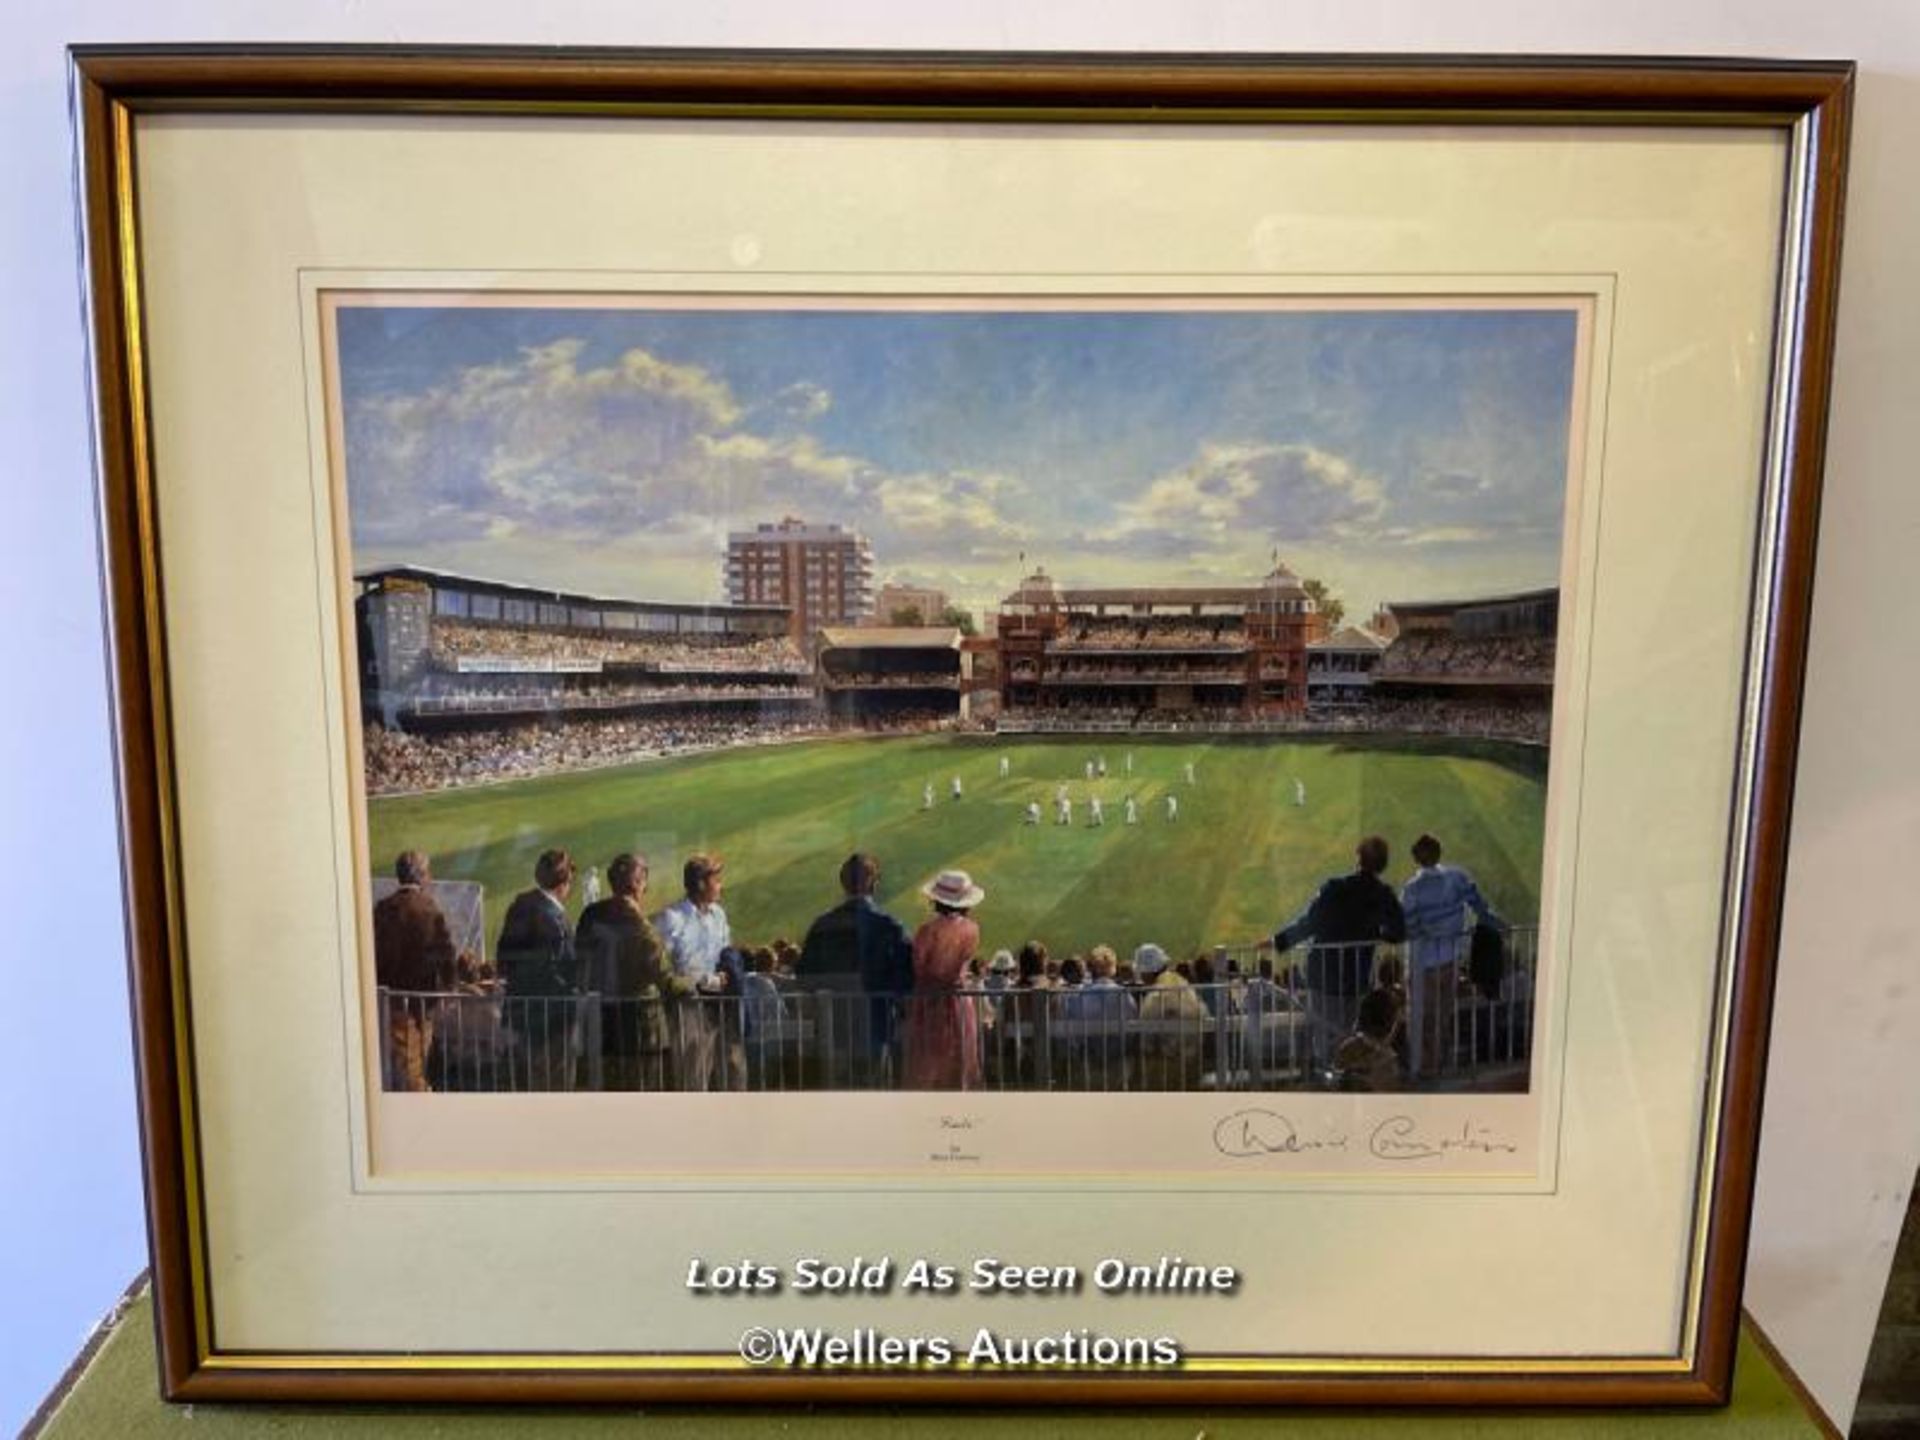 FRAMED AND GLAZED PRINT OF LORDS BY ALAN FEARNLEY, SIGNED BY DENIS COMPTON, 67CM X 55CM